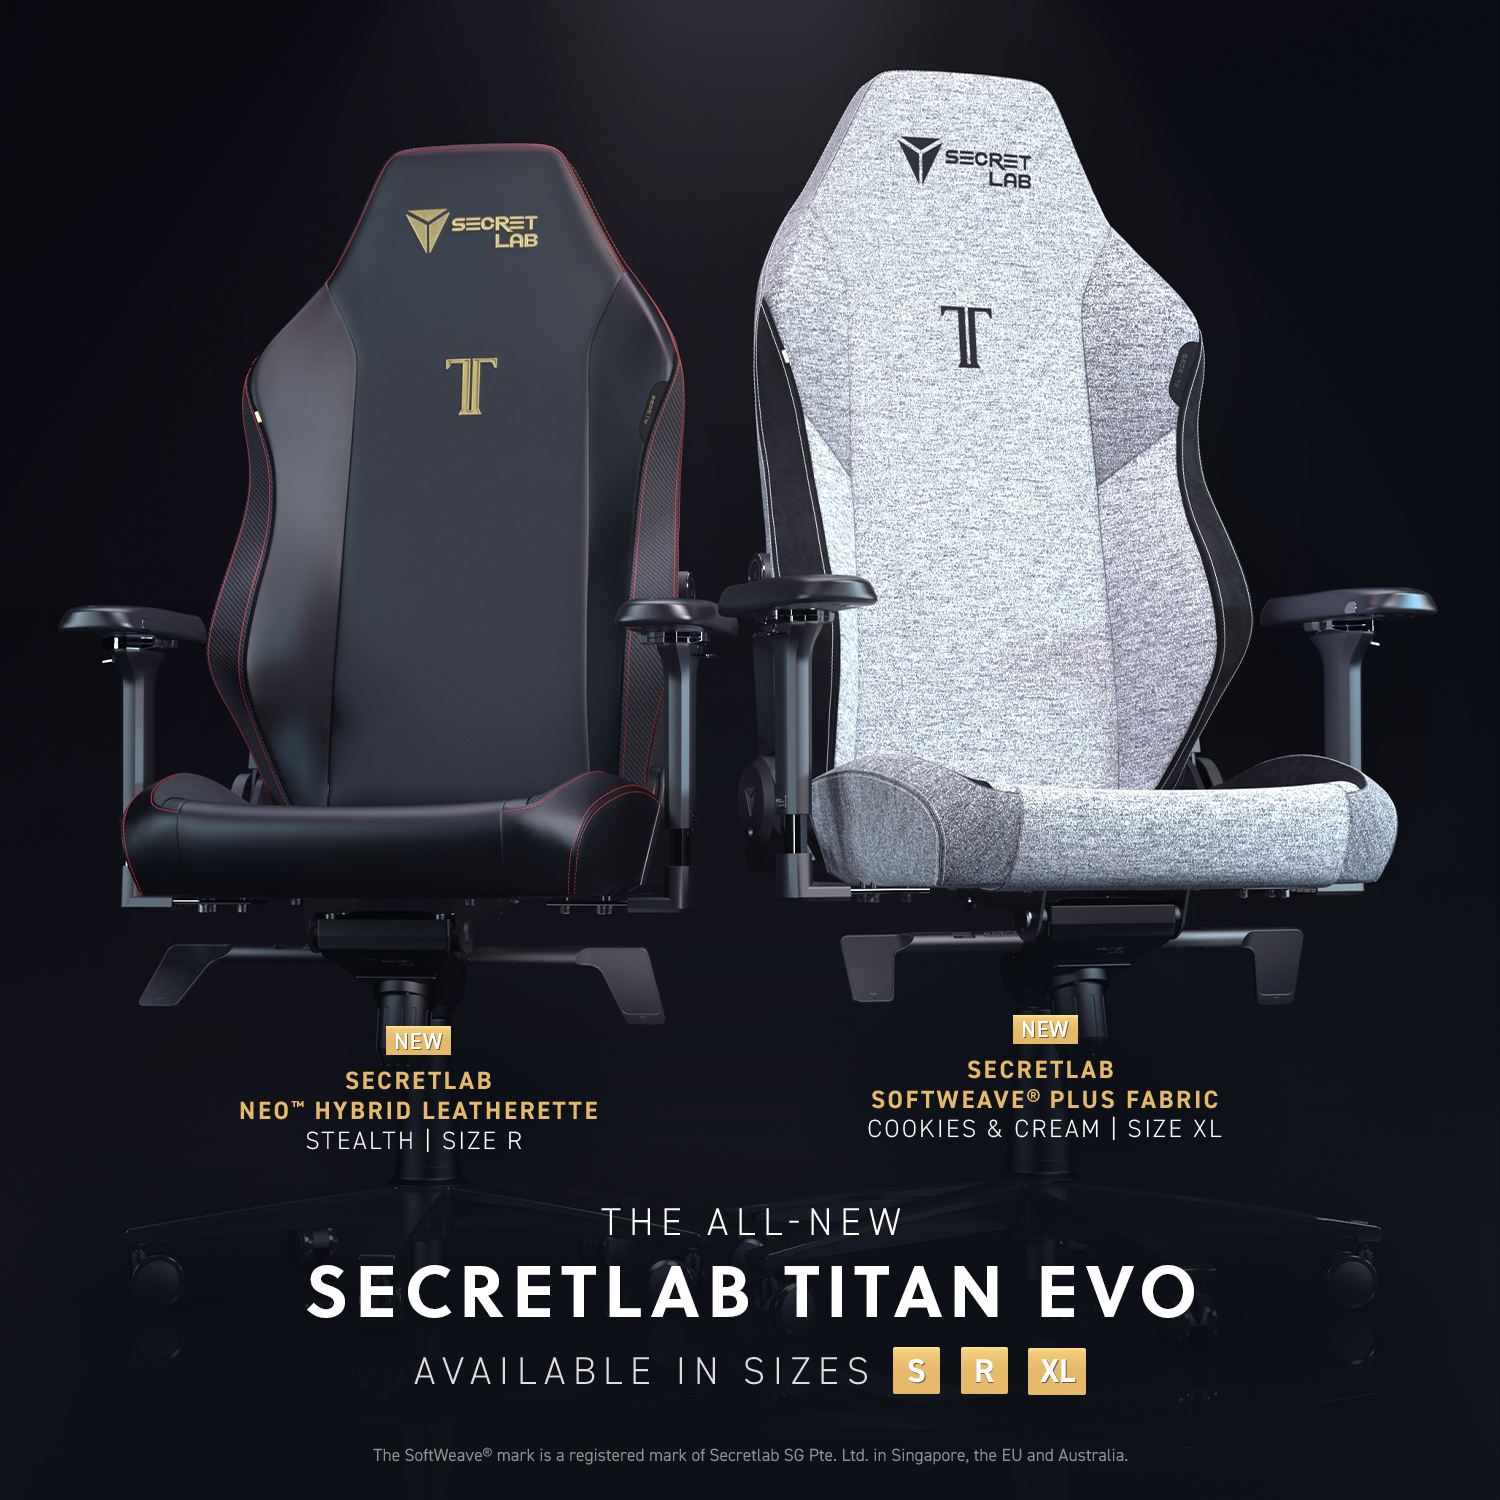 Secret Lab Titan vs. Neue: Which is the Better Buy?